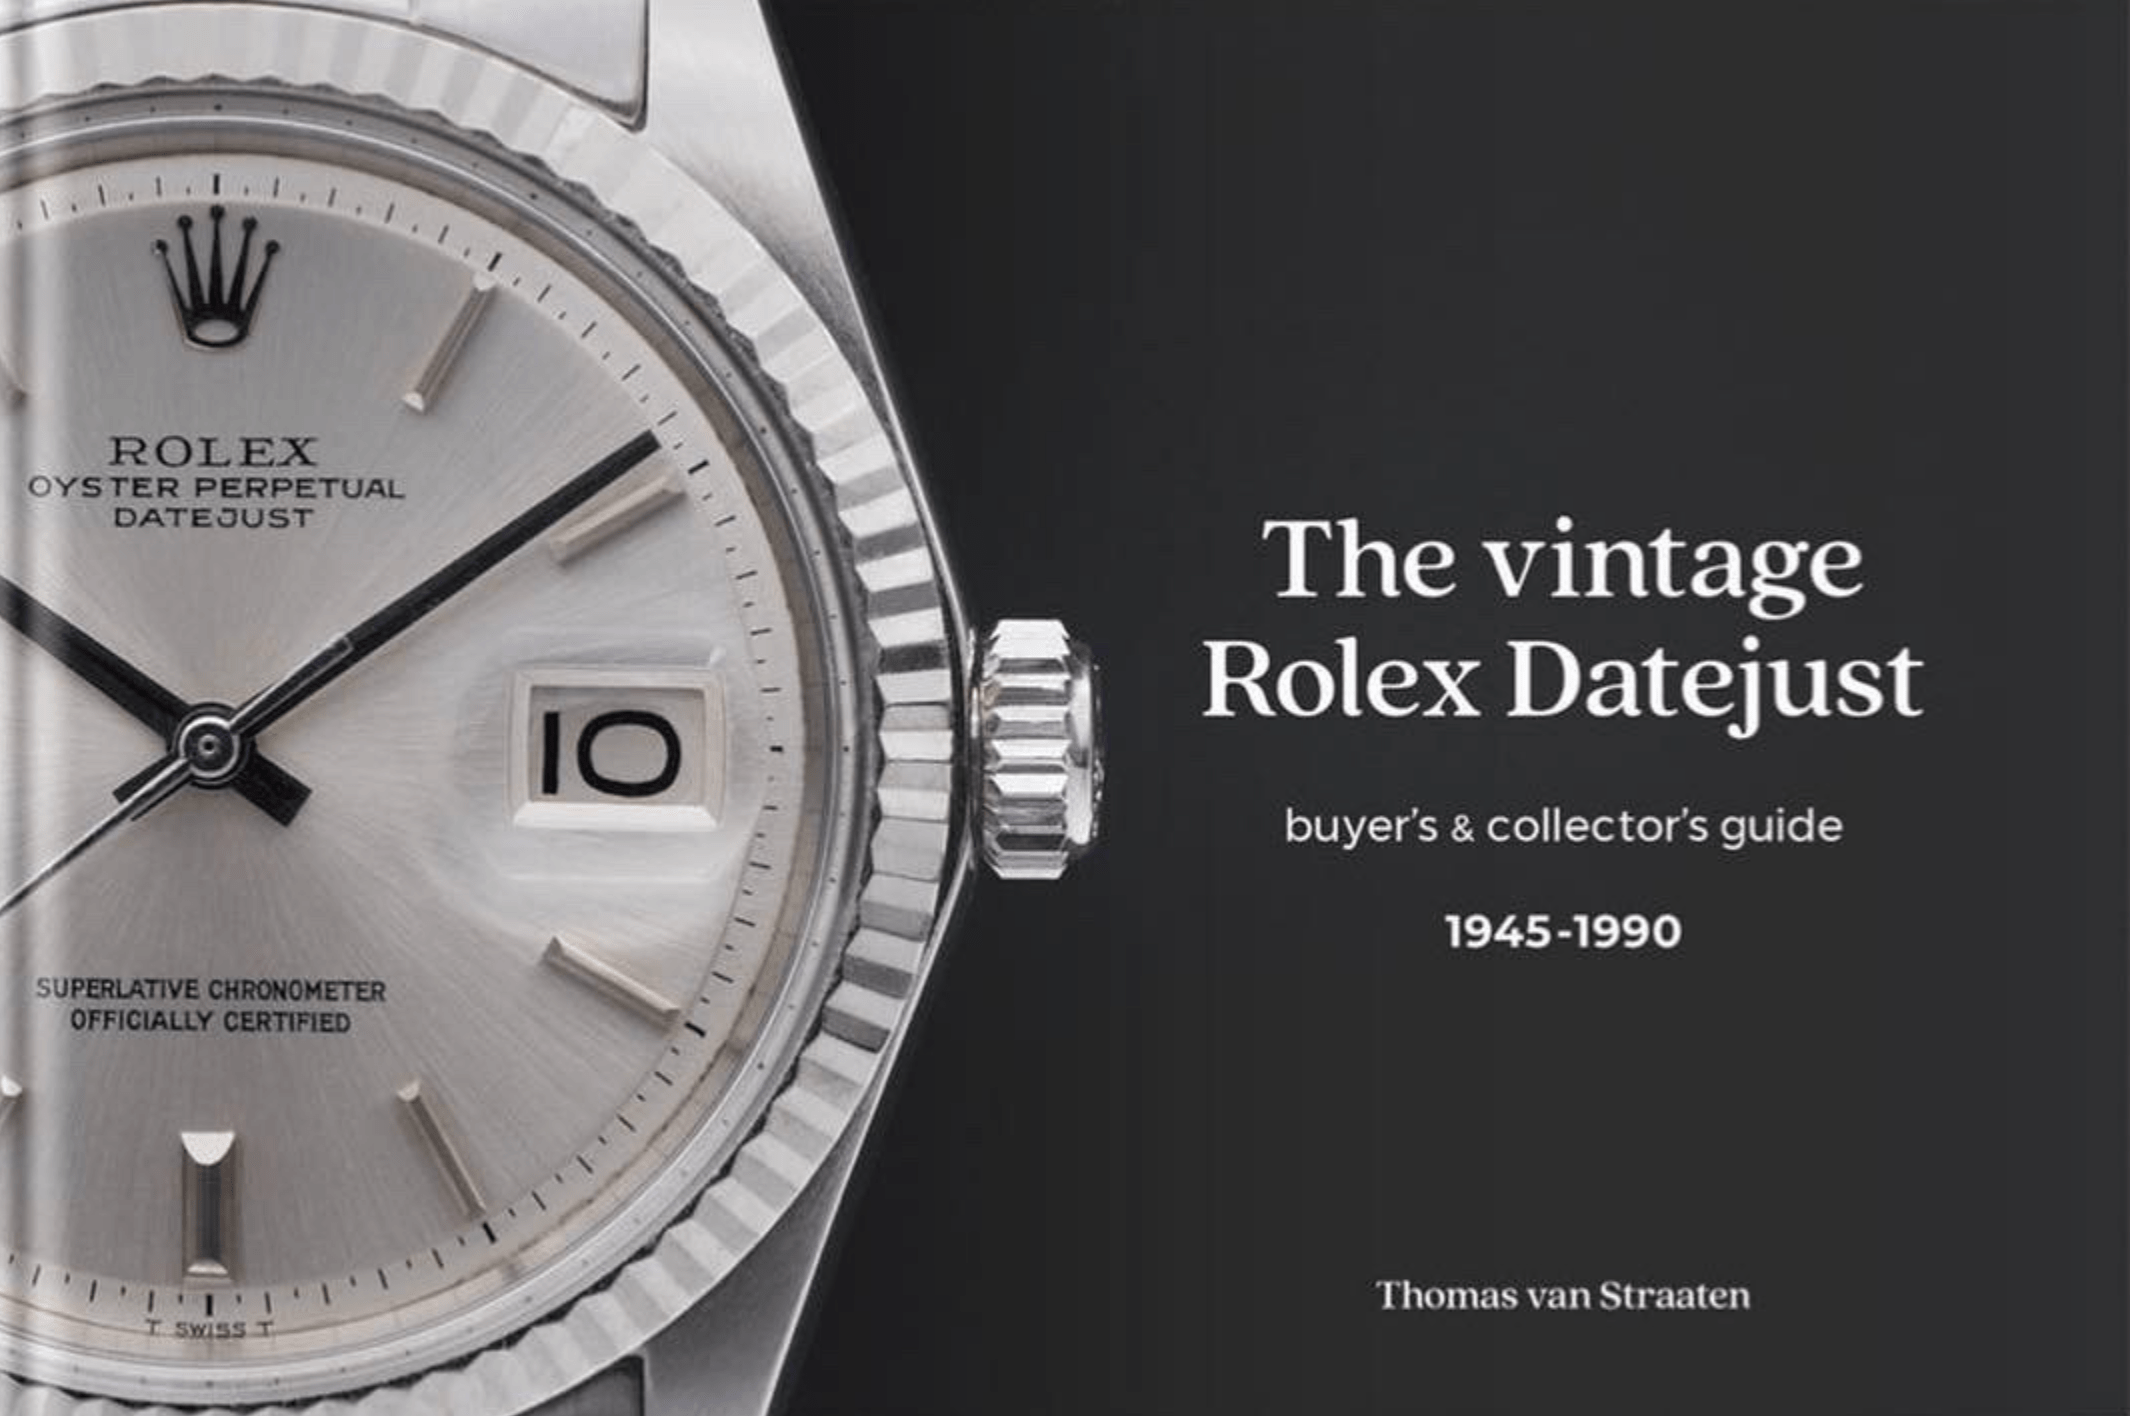 The Vintage Rolex Datejust Buyer’s & Collector’s Guide